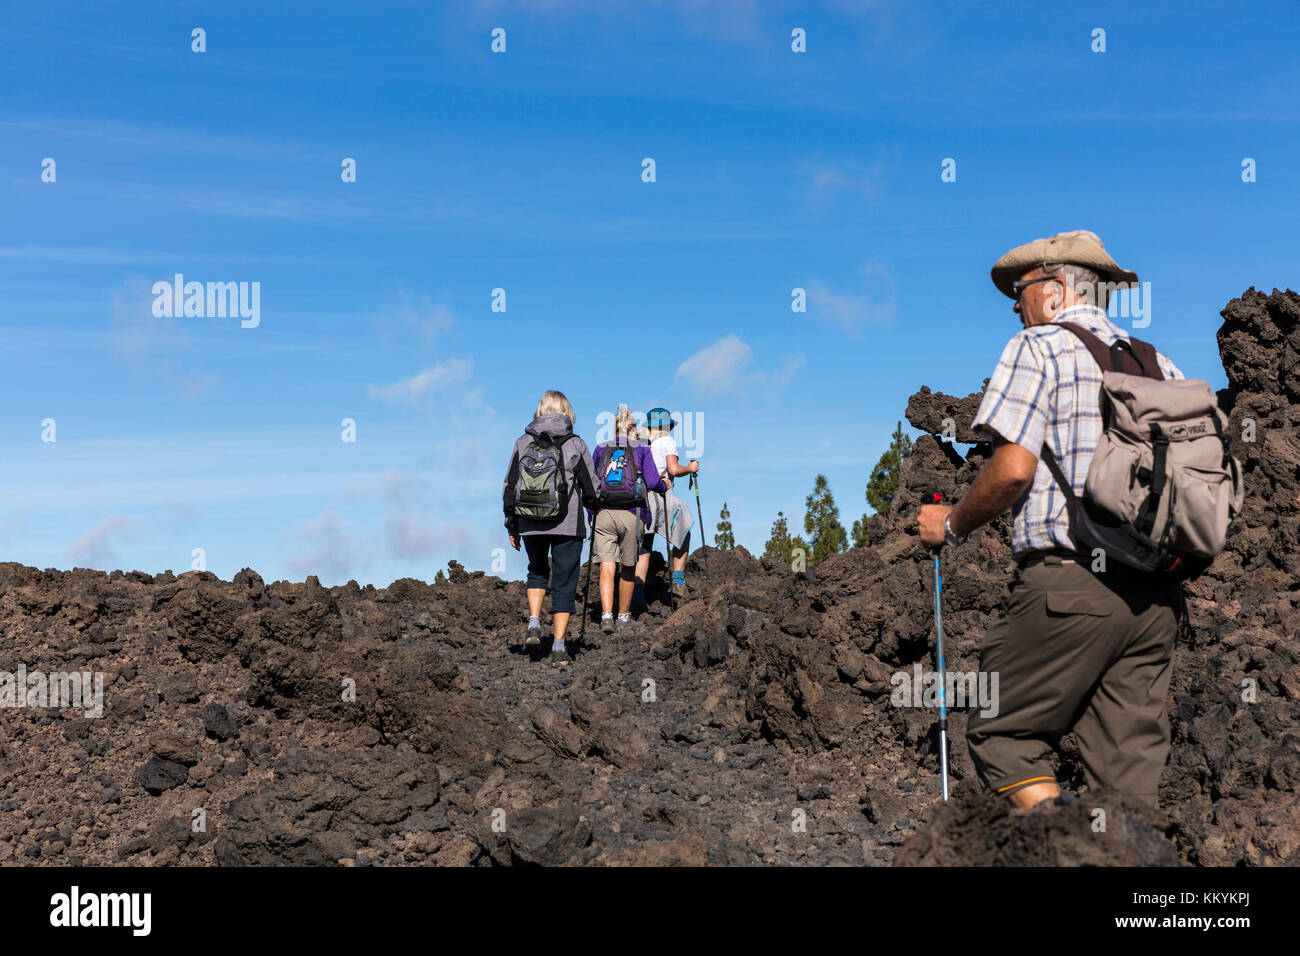 Walking in the volcanic landscape of Montana Samara and Cuevas Negras in the national park, Las Canadas del Teide, Tenerife, Canary Islands Stock Photo